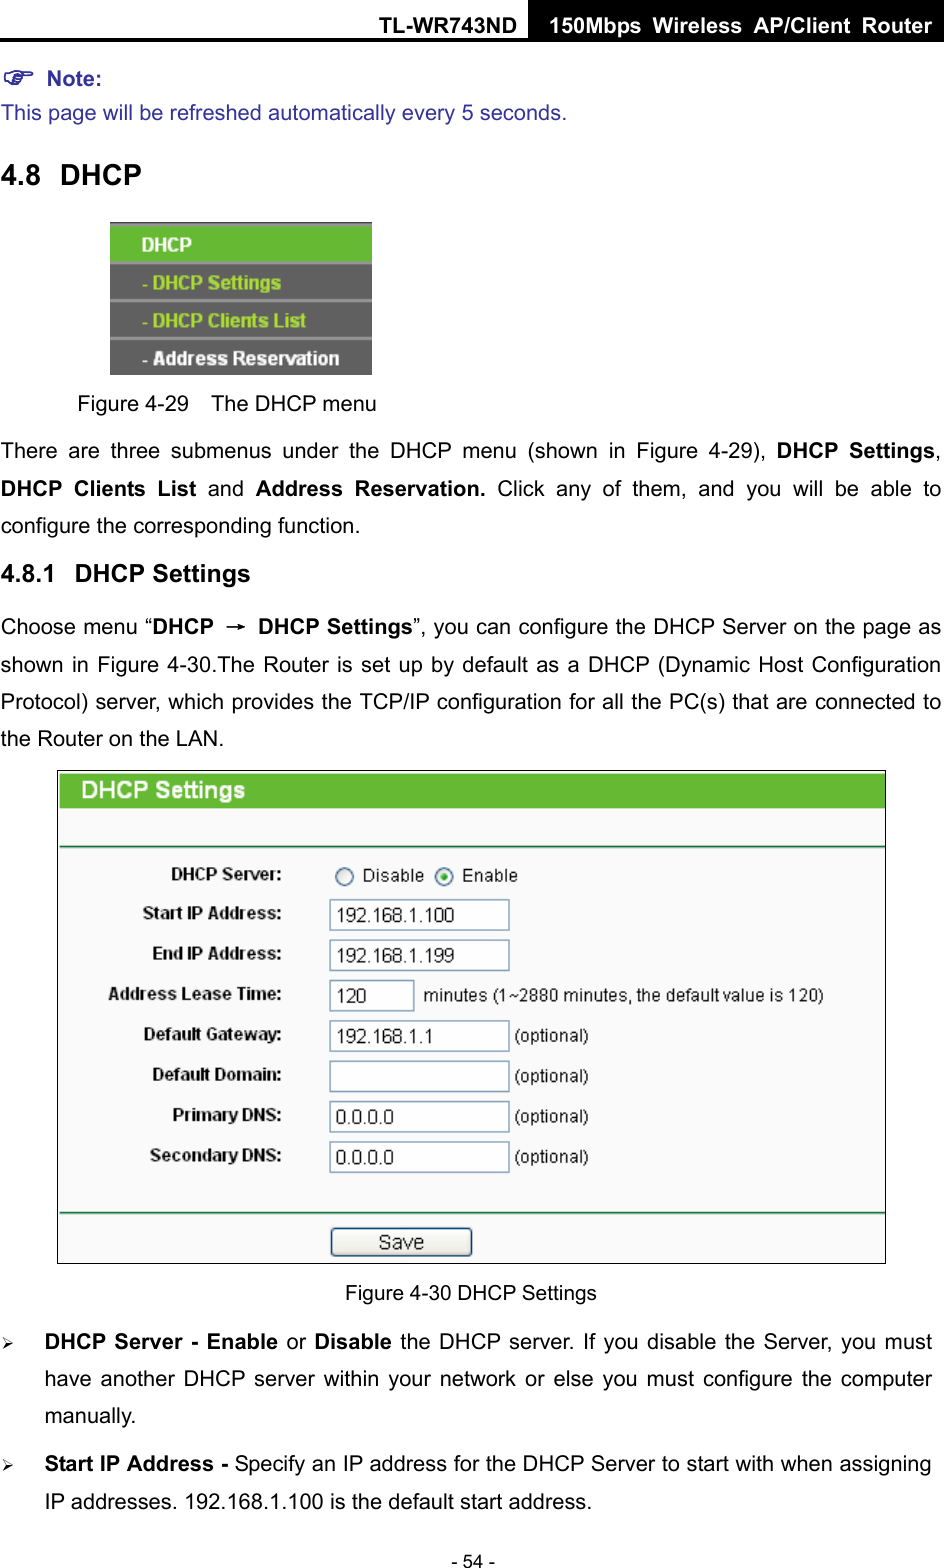 TL-WR743ND 150Mbps Wireless AP/Client Router - 54 - ) Note:  This page will be refreshed automatically every 5 seconds. 4.8  DHCP  Figure 4-29    The DHCP menu There are three submenus under the DHCP menu (shown in Figure 4-29),  DHCP Settings, DHCP Clients List and  Address Reservation. Click any of them, and you will be able to configure the corresponding function. 4.8.1  DHCP Settings Choose menu “DHCP  → DHCP Settings”, you can configure the DHCP Server on the page as shown in Figure 4-30.The Router is set up by default as a DHCP (Dynamic Host Configuration Protocol) server, which provides the TCP/IP configuration for all the PC(s) that are connected to the Router on the LAN.    Figure 4-30 DHCP Settings ¾ DHCP Server - Enable or Disable the DHCP server. If you disable the Server, you must have another DHCP server within your network or else you must configure the computer manually. ¾ Start IP Address - Specify an IP address for the DHCP Server to start with when assigning IP addresses. 192.168.1.100 is the default start address. 